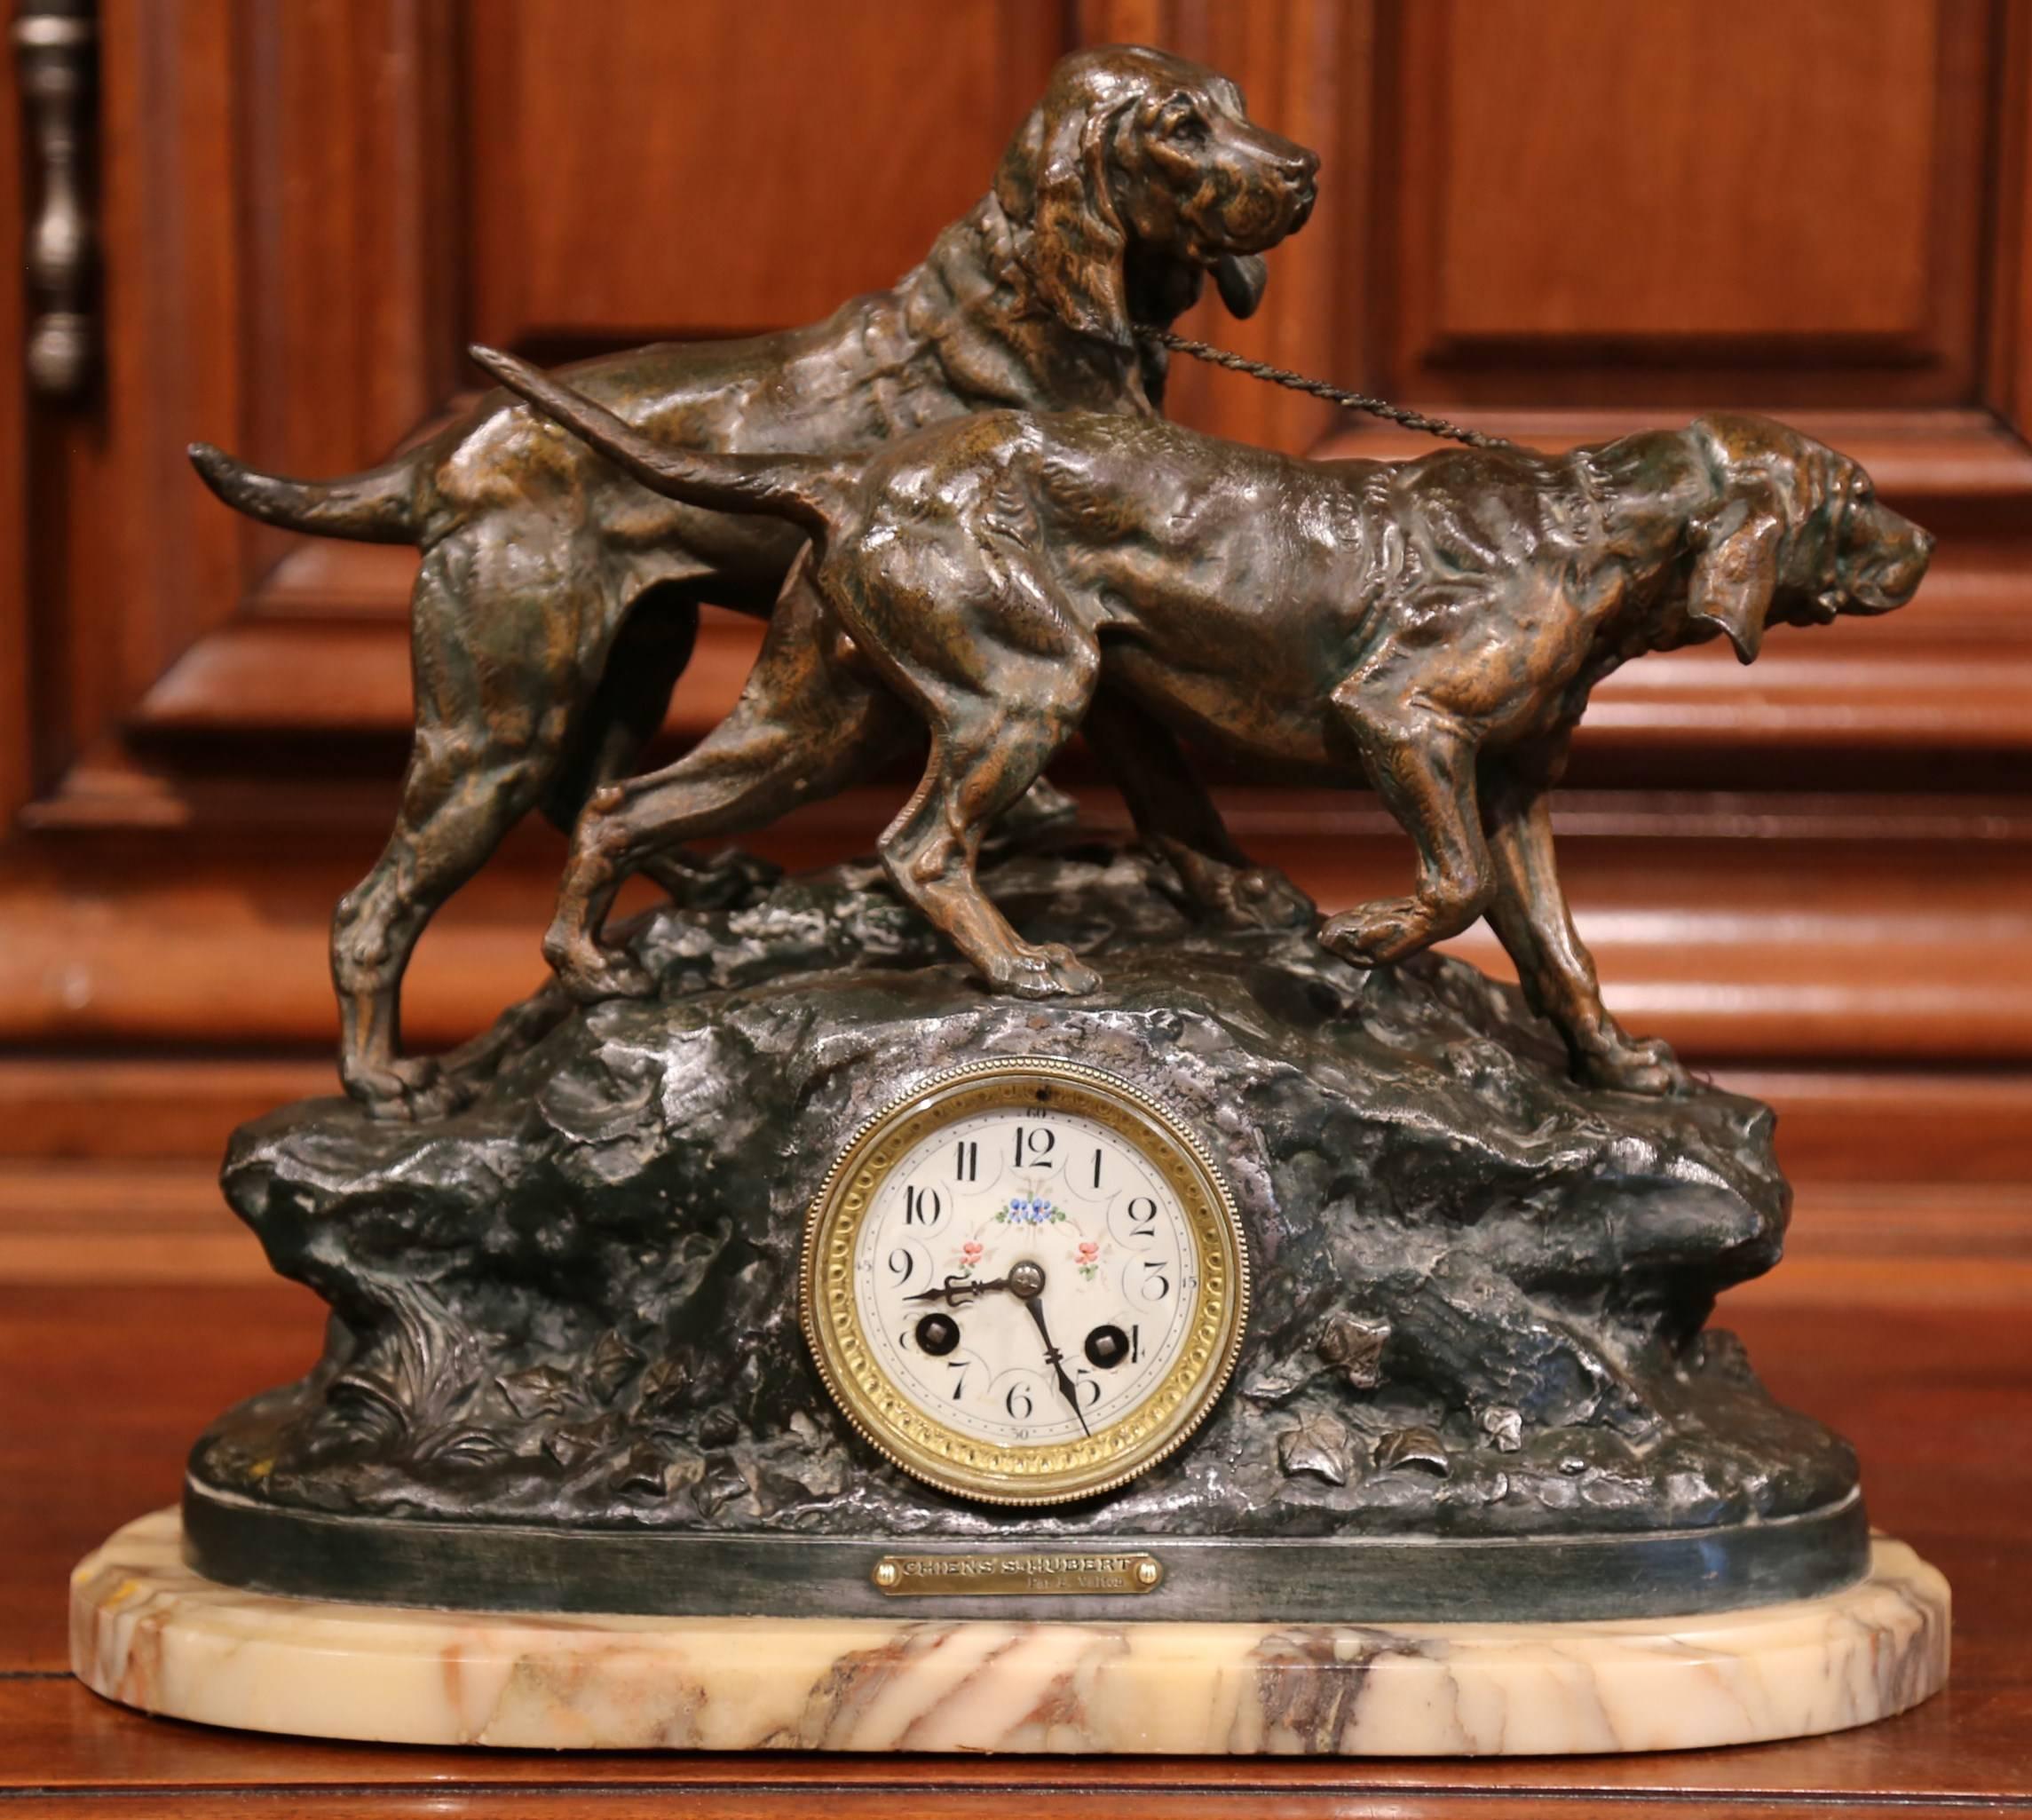 This beautiful mantel clock set was crafted in France, circa 1880. The centrepiece of this figural, spelter set has a clock on beige marble base with two hunting Saint Hubert dogs standing on rocky terrain above the centre face. The clock